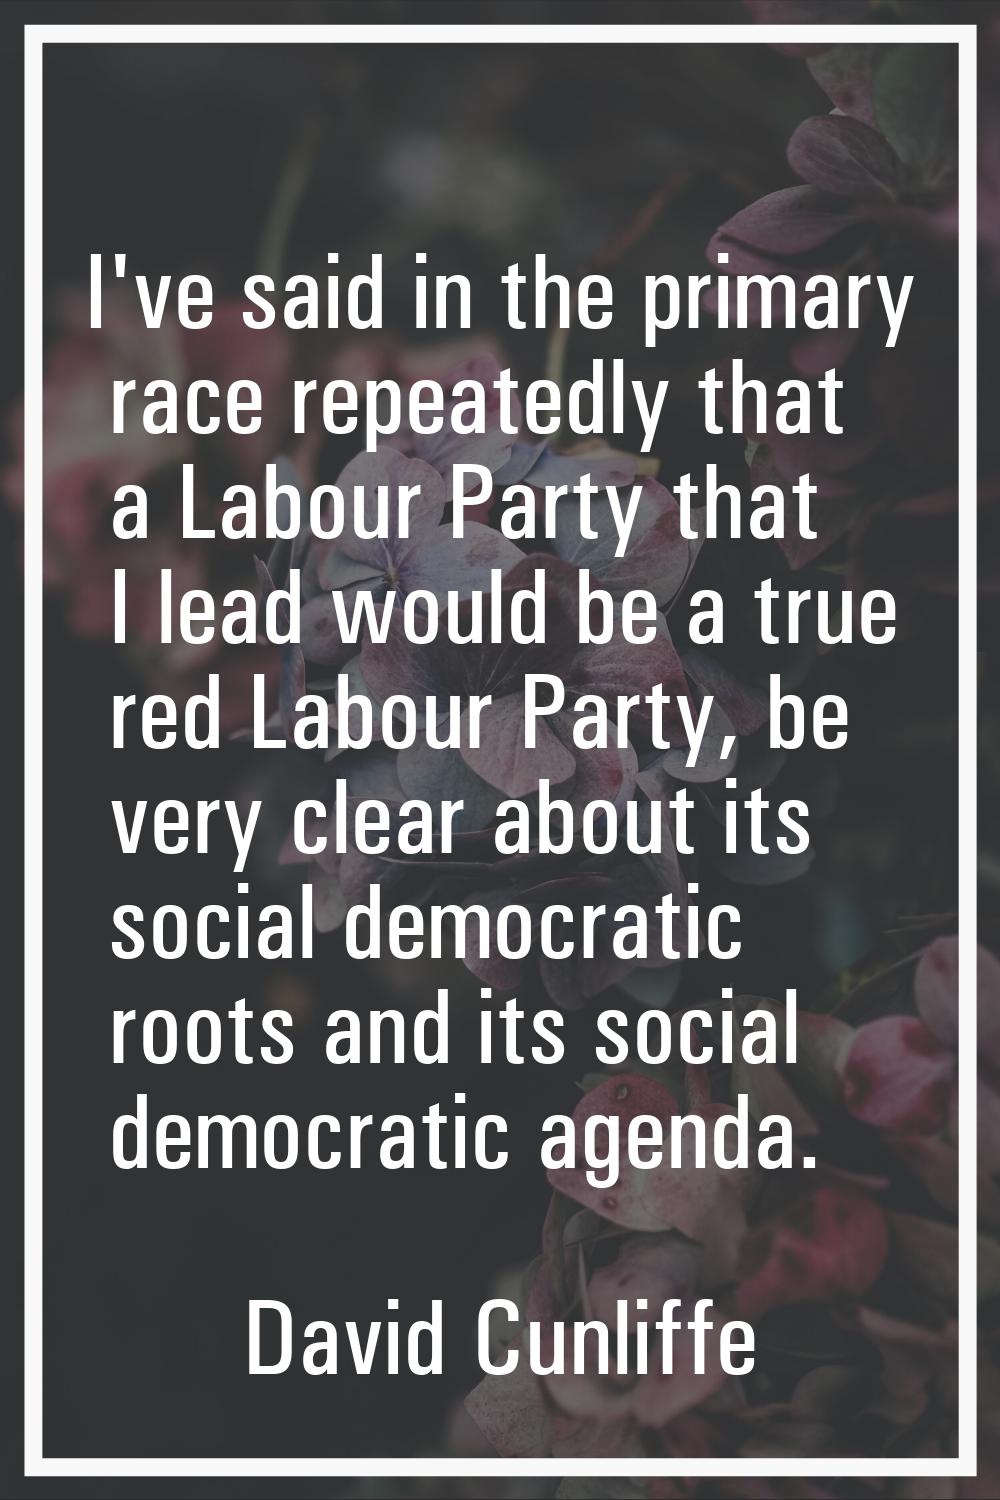 I've said in the primary race repeatedly that a Labour Party that I lead would be a true red Labour